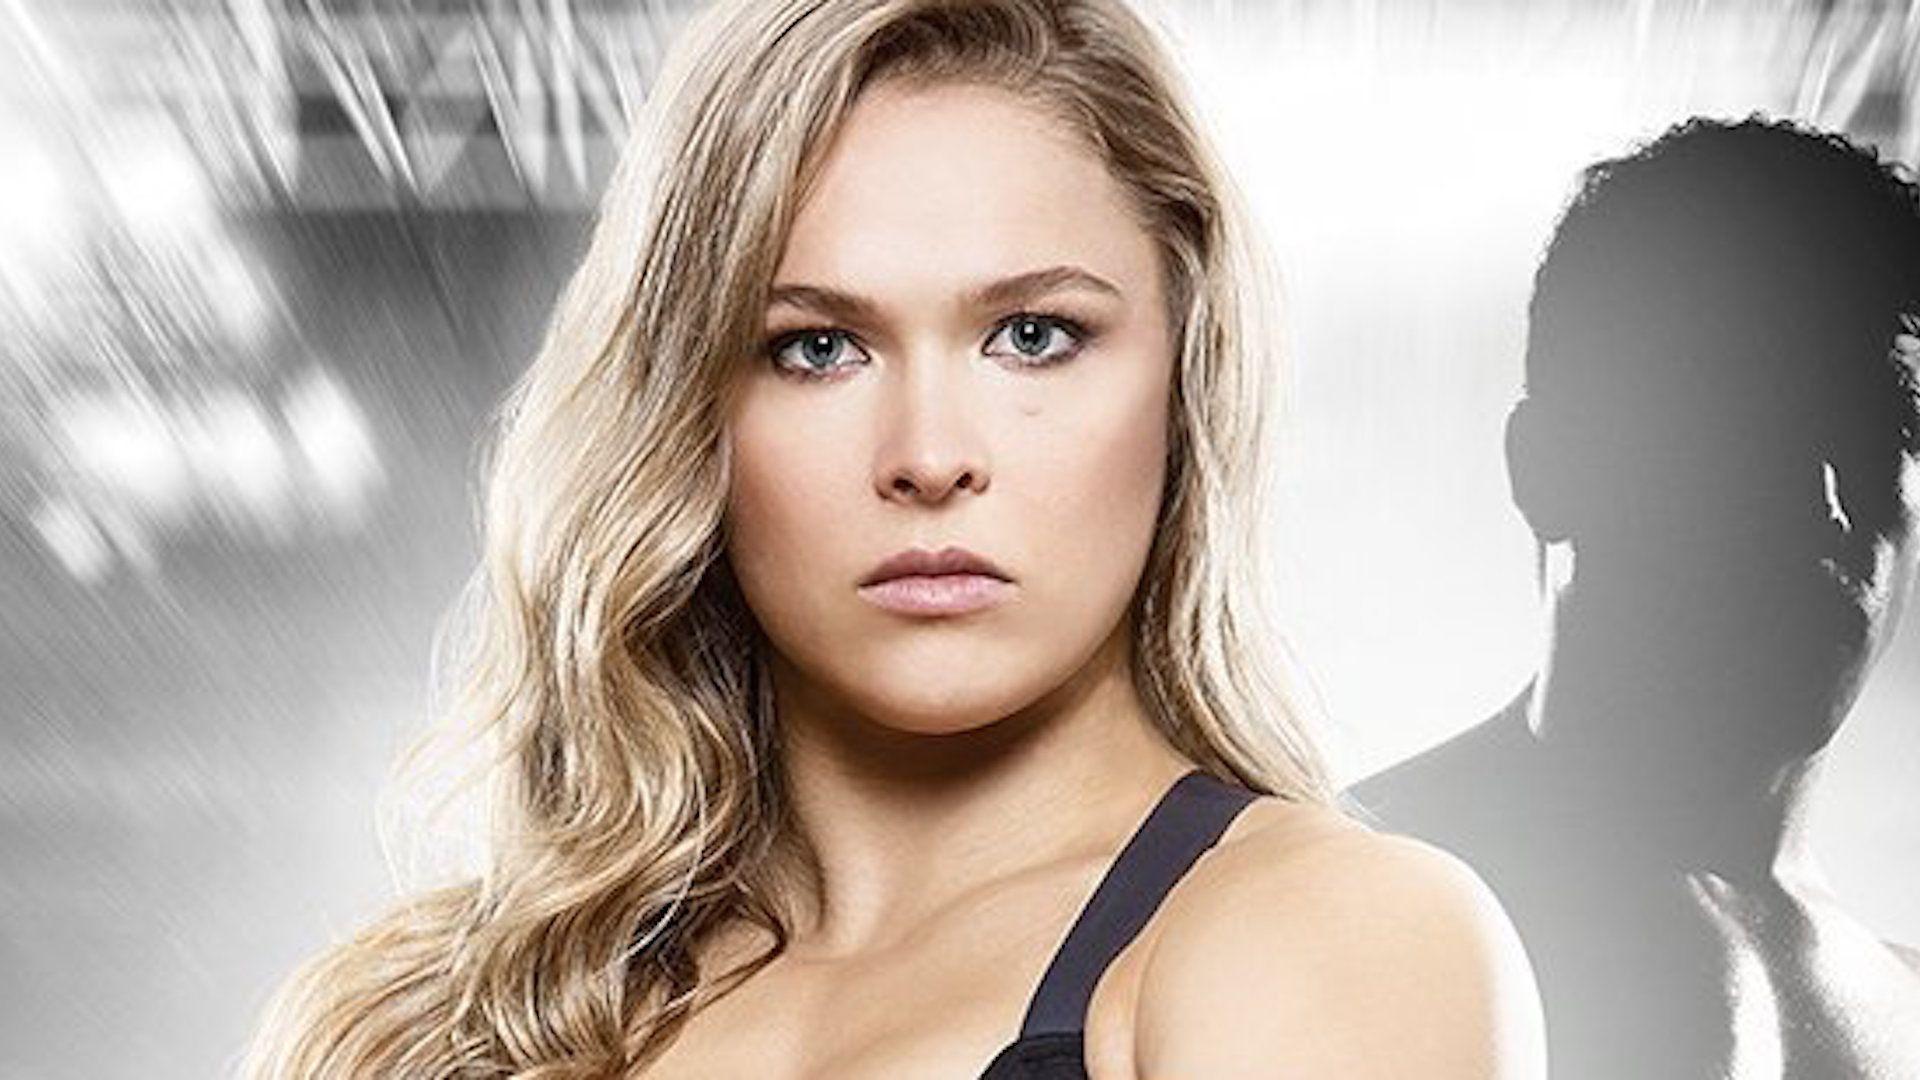 UFC Legend Ronda Rousey Joins WWE Full Time